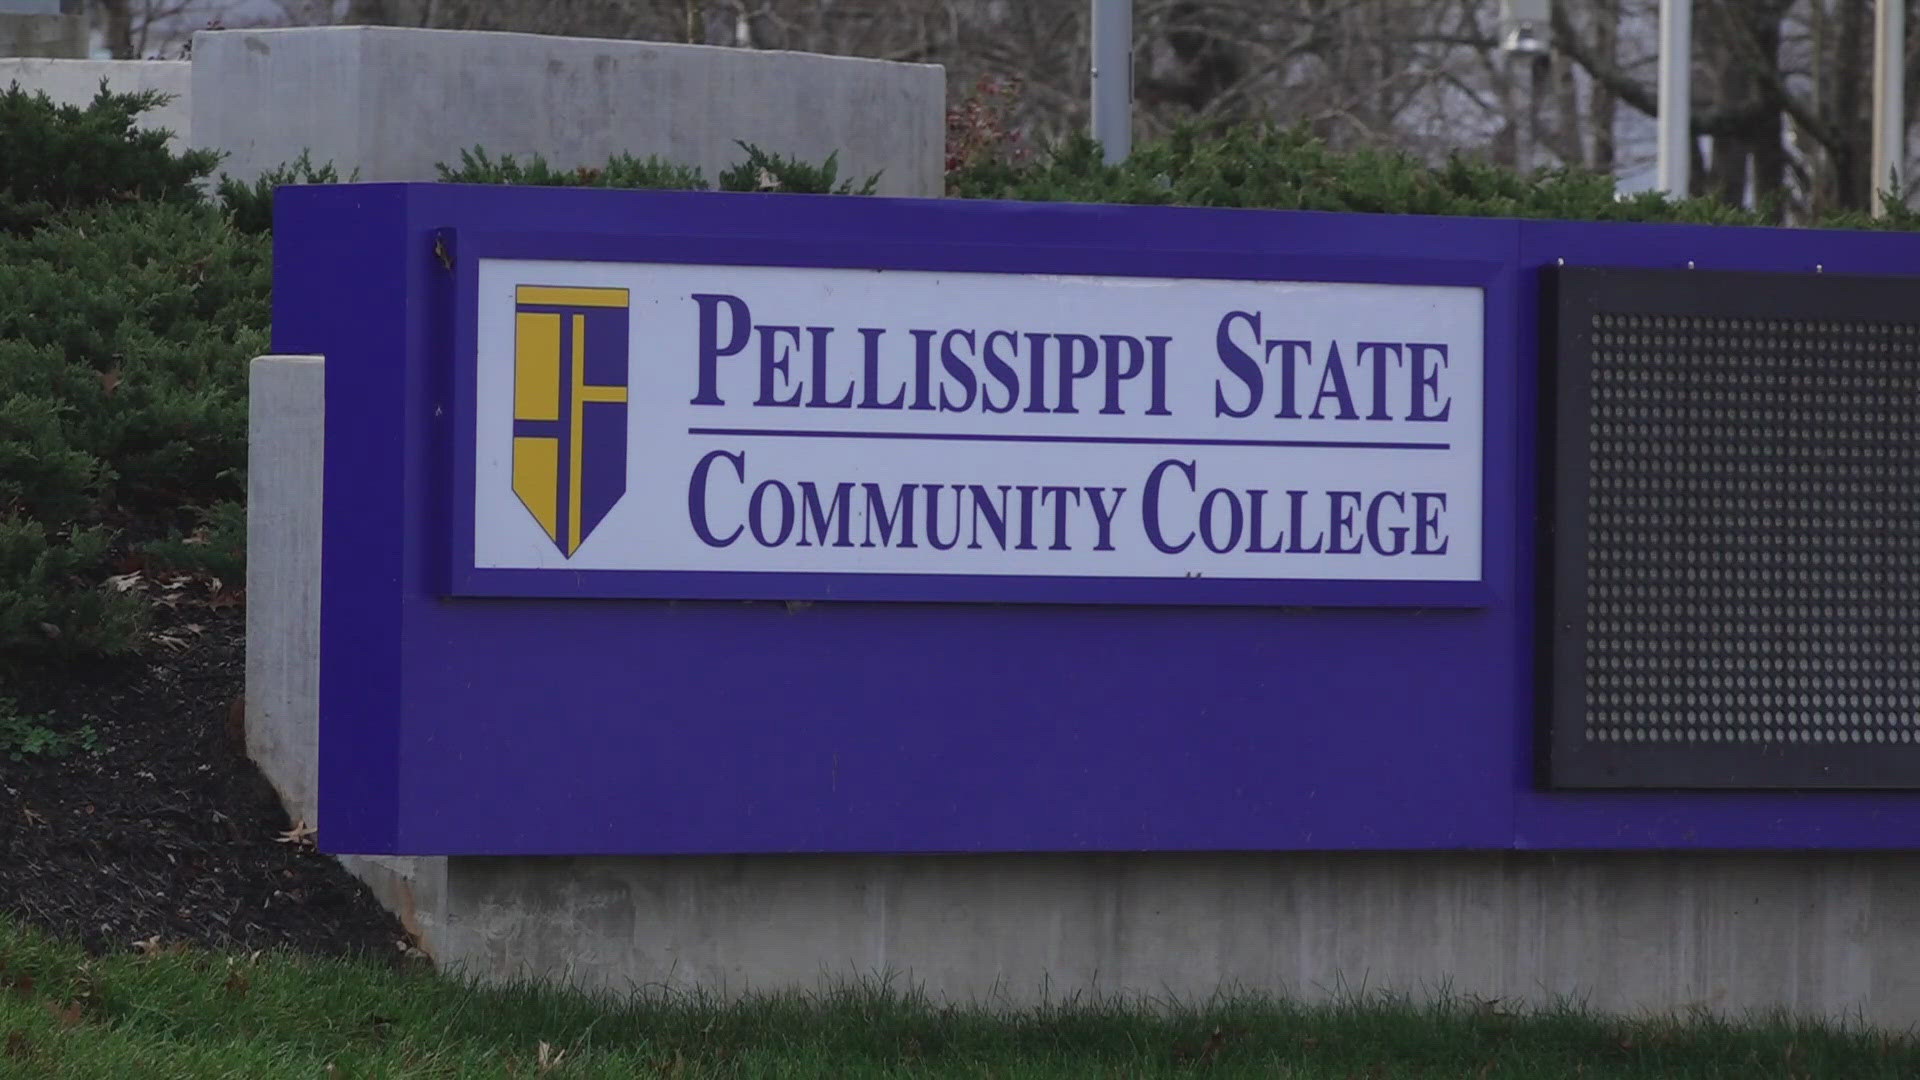 The instructor at Pellissippi State had his employment terminated at the community college after his OnlyFans page was leaked.